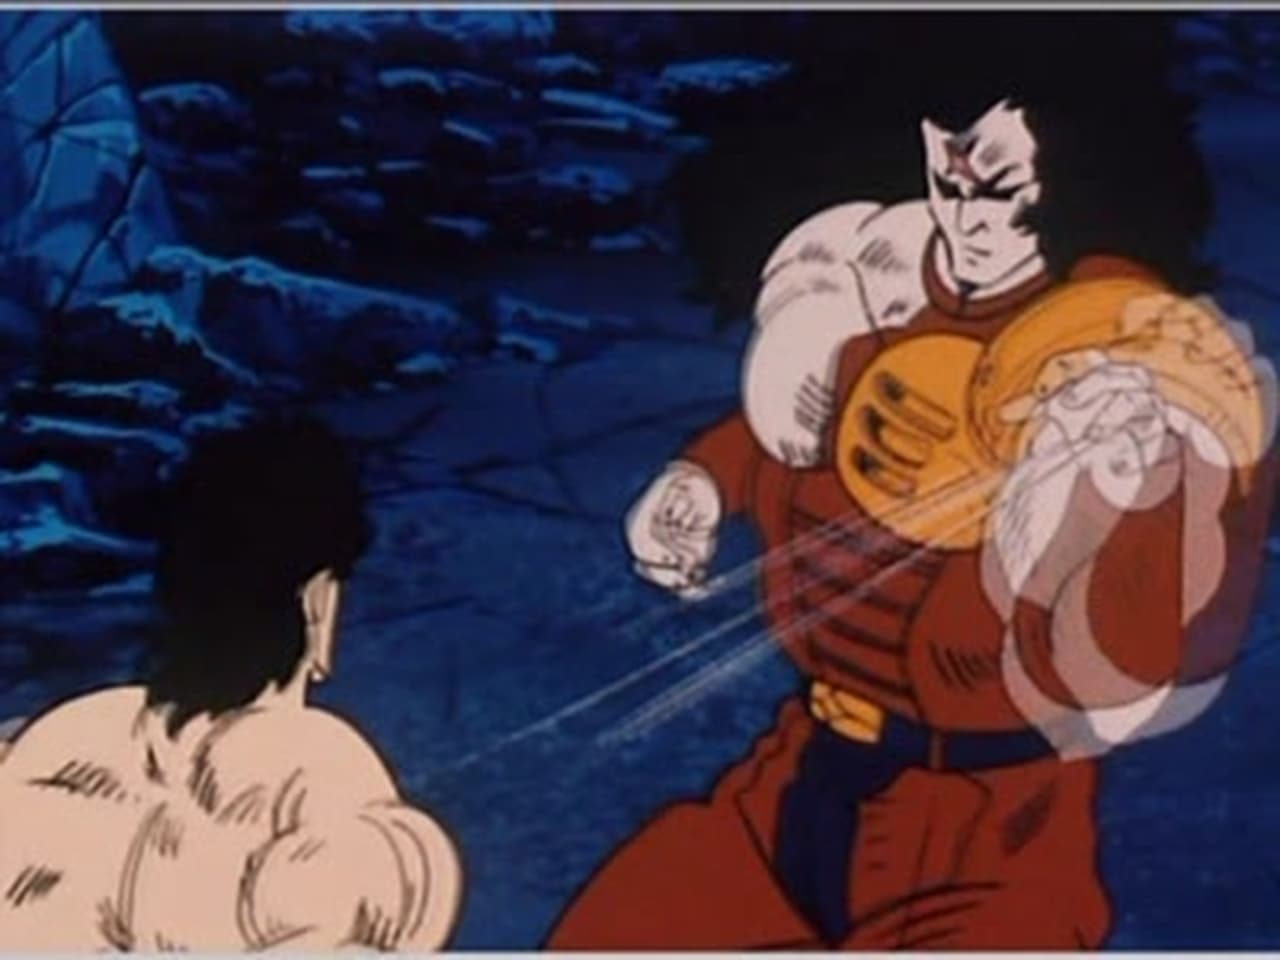 Tearful Reunion of the Brothers Kenshiro Ive Been Waiting for You